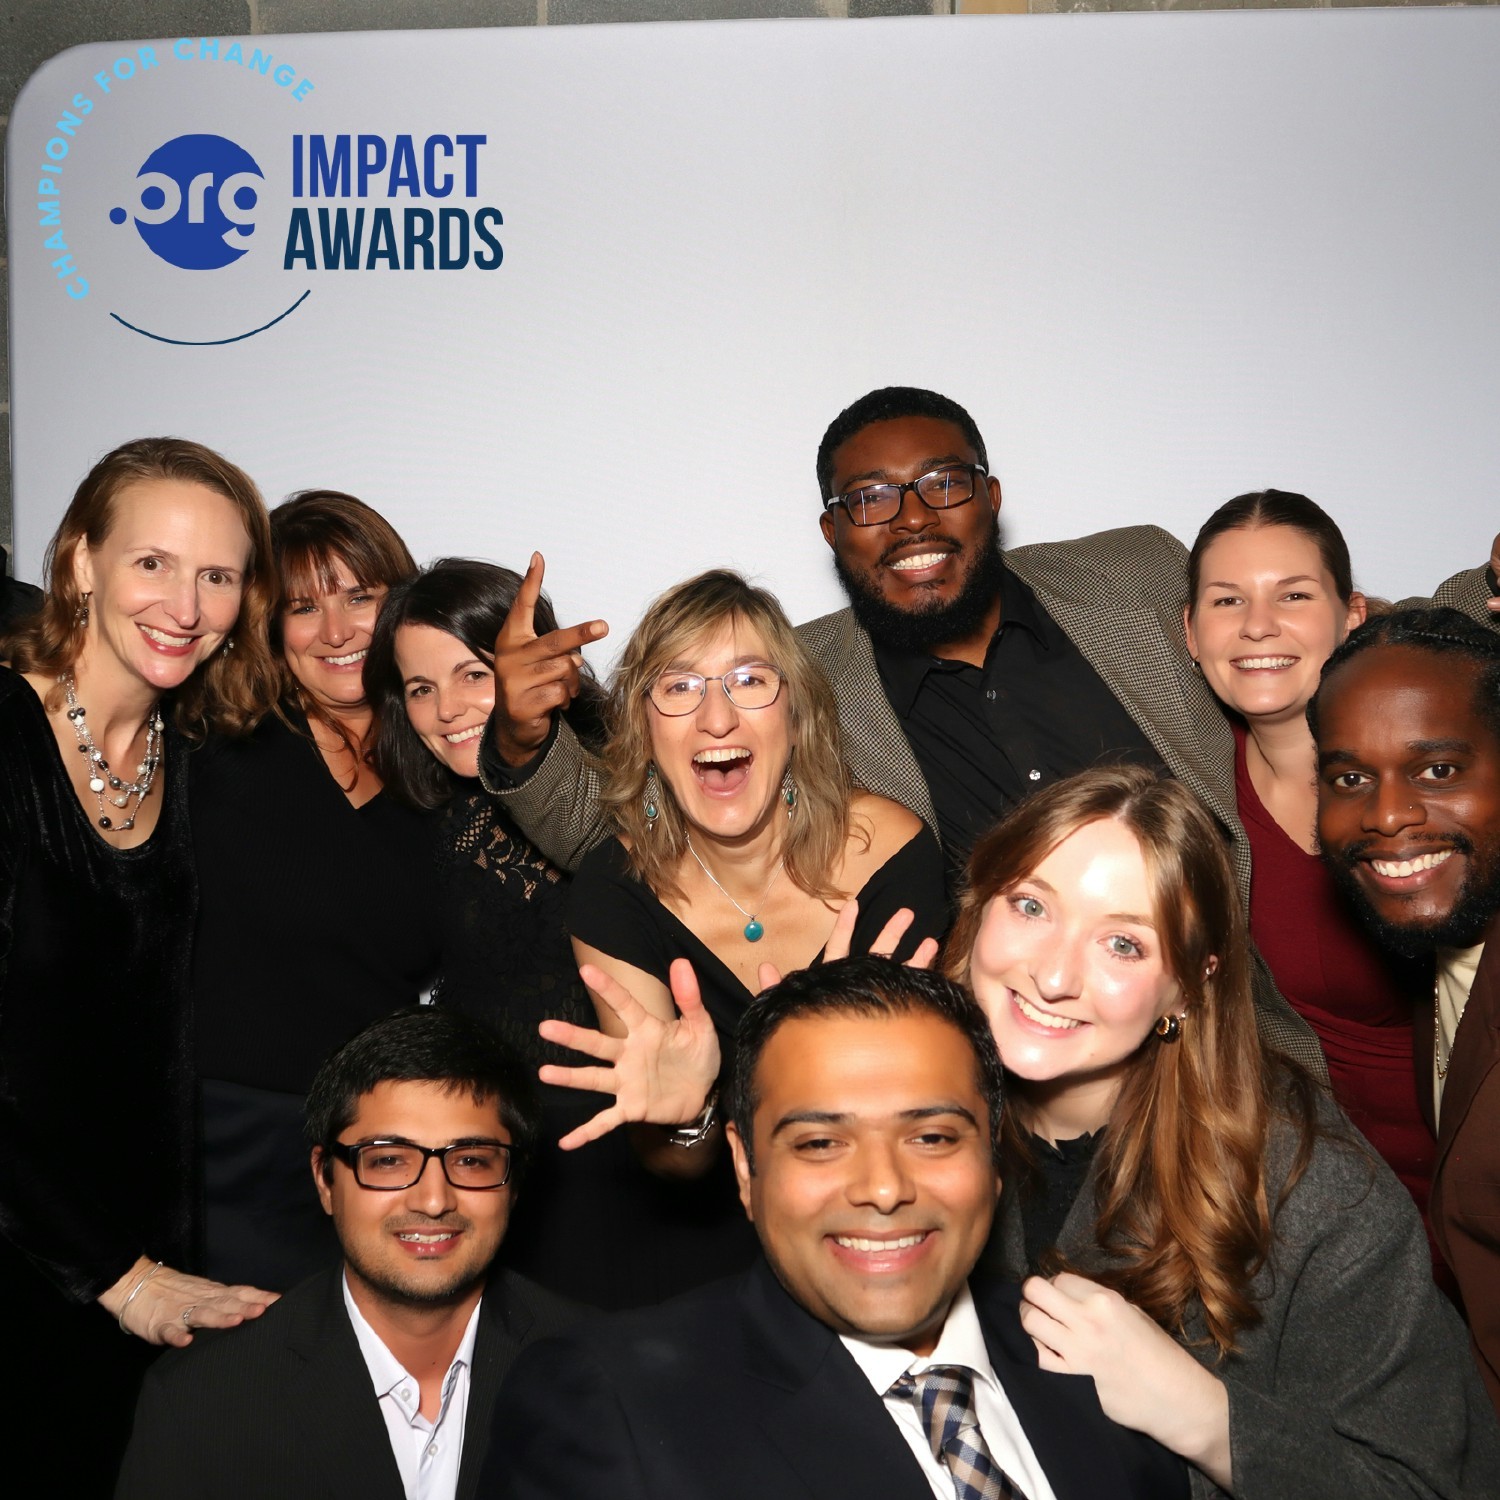 The .ORG Impact Awards give us an opportunity to celebrate the amazing .ORGs who are changing our world for good!